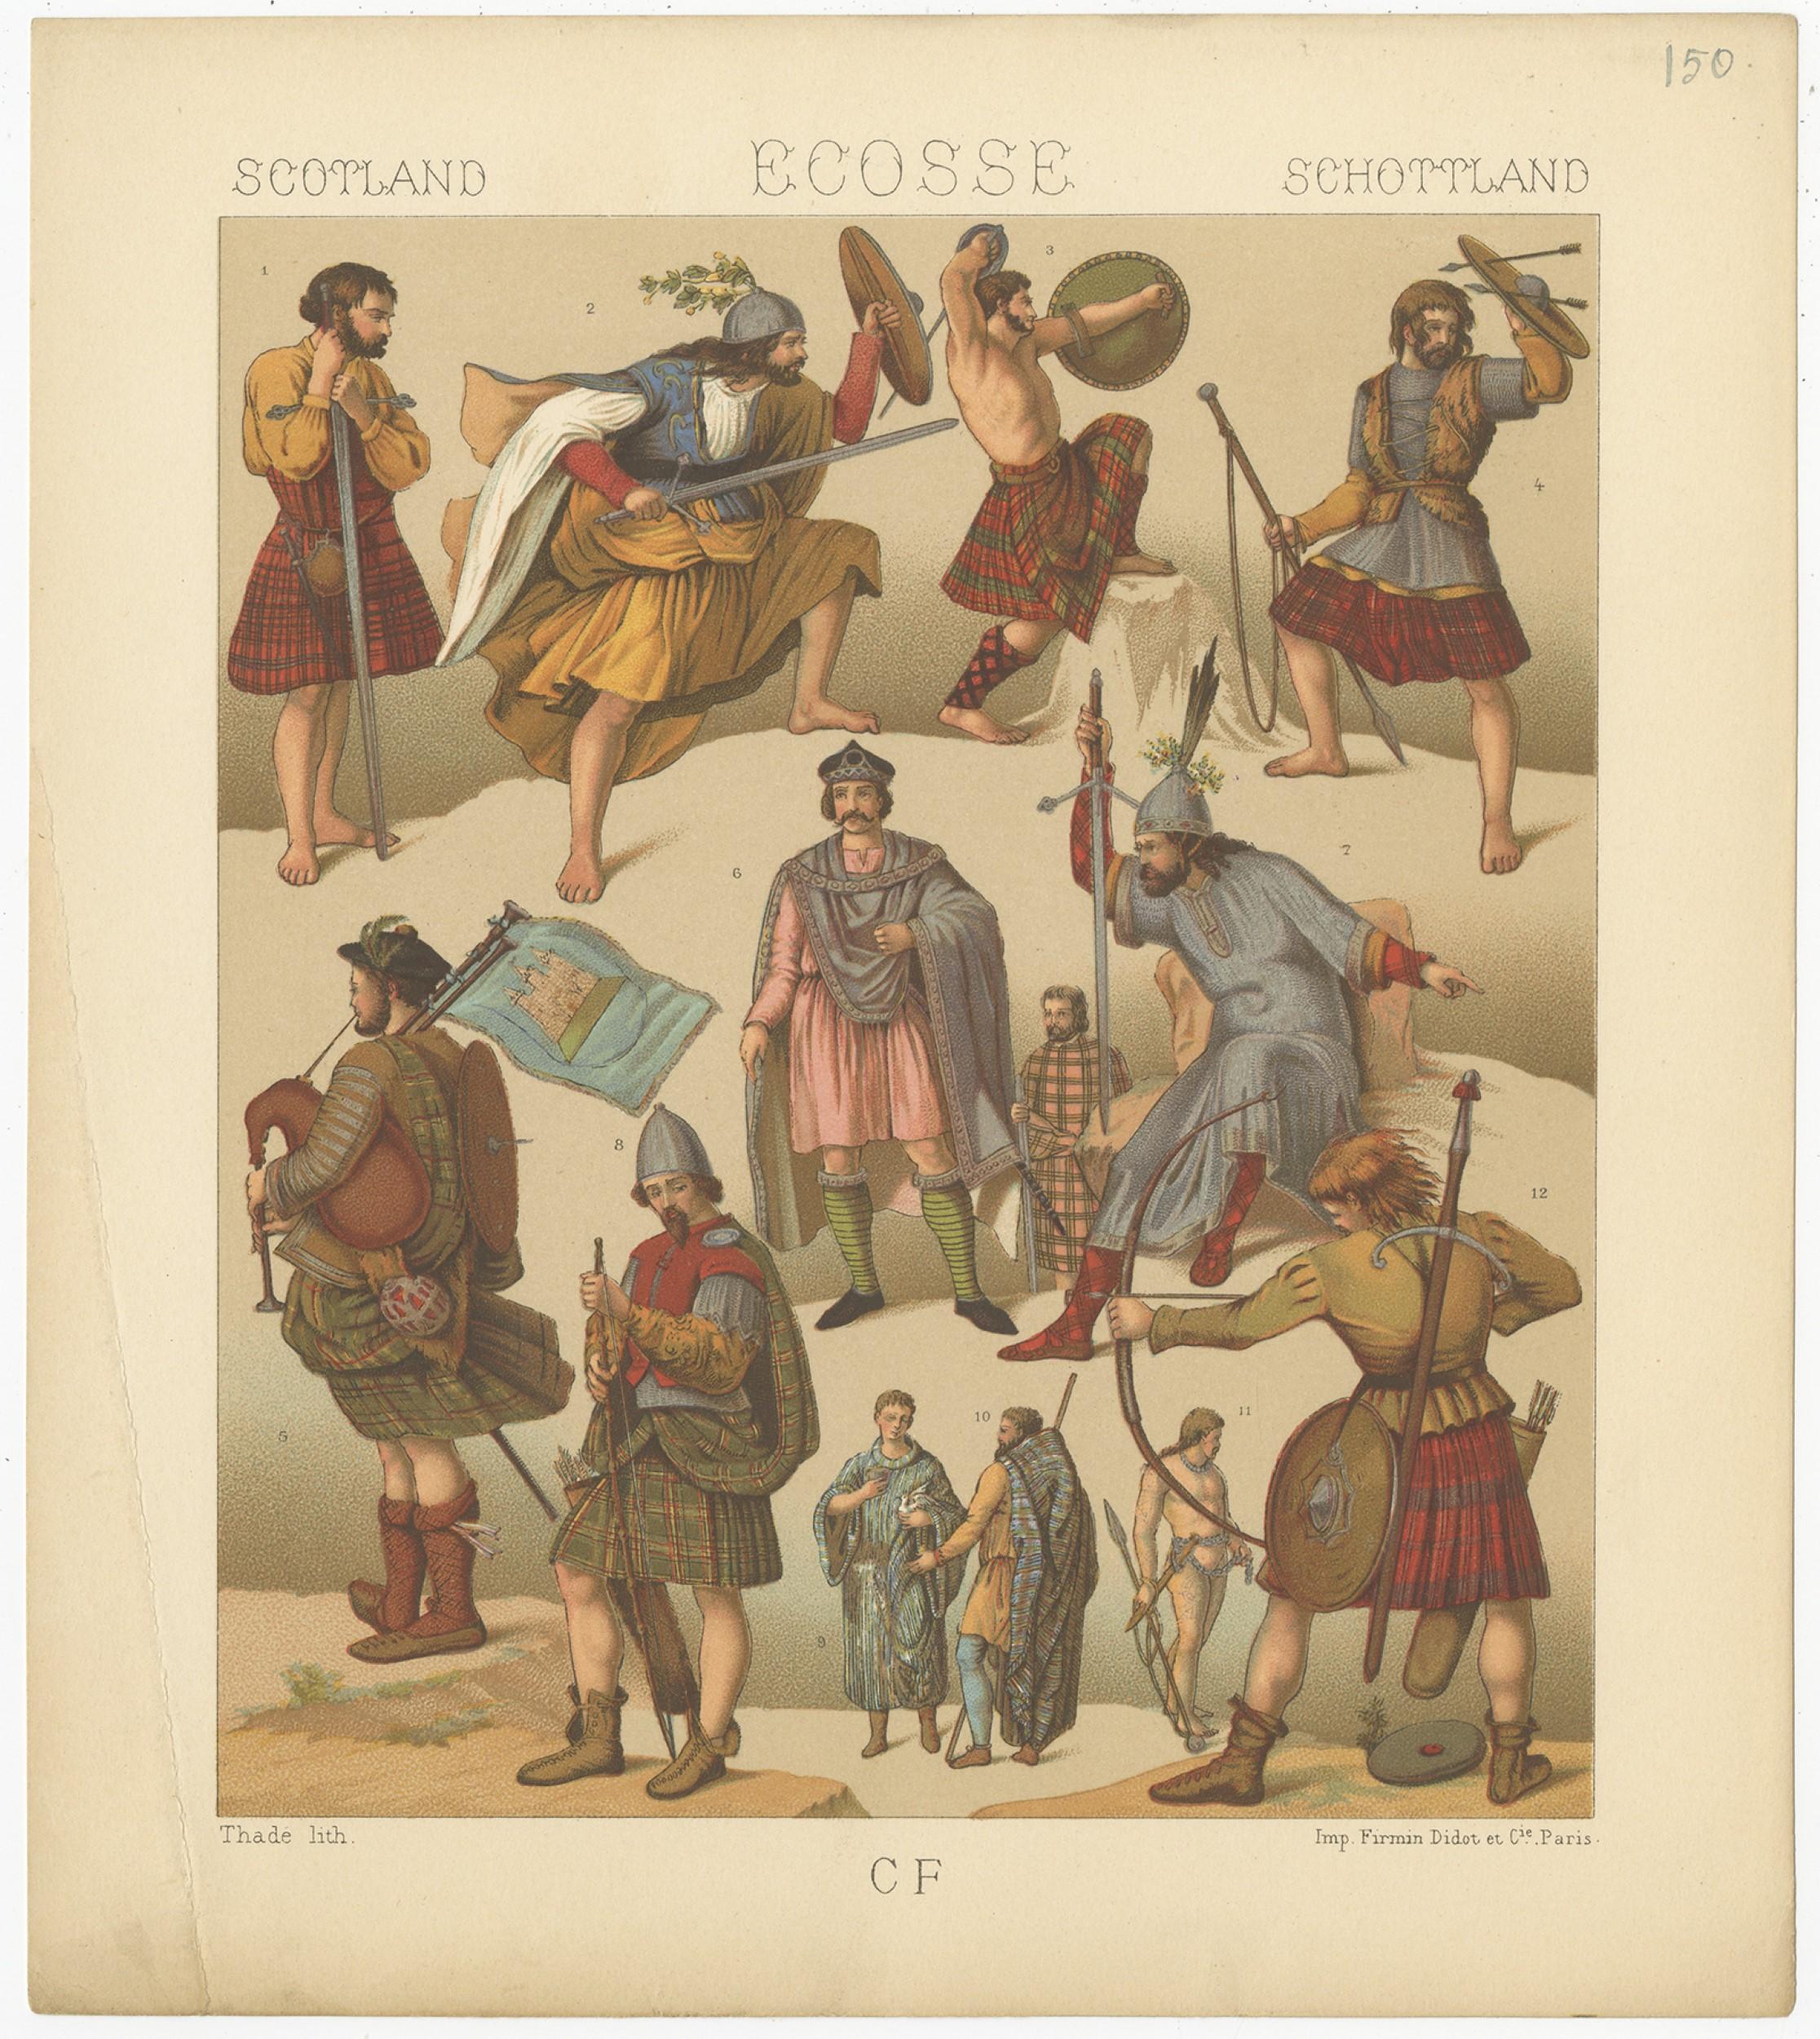 Antique print titled 'Scotland - Ecosse - Schottland'. Chromolithograph of Scottish Military Outfits. This print originates from 'Le Costume Historique' by M.A. Racinet. Published, circa 1880.
 
  